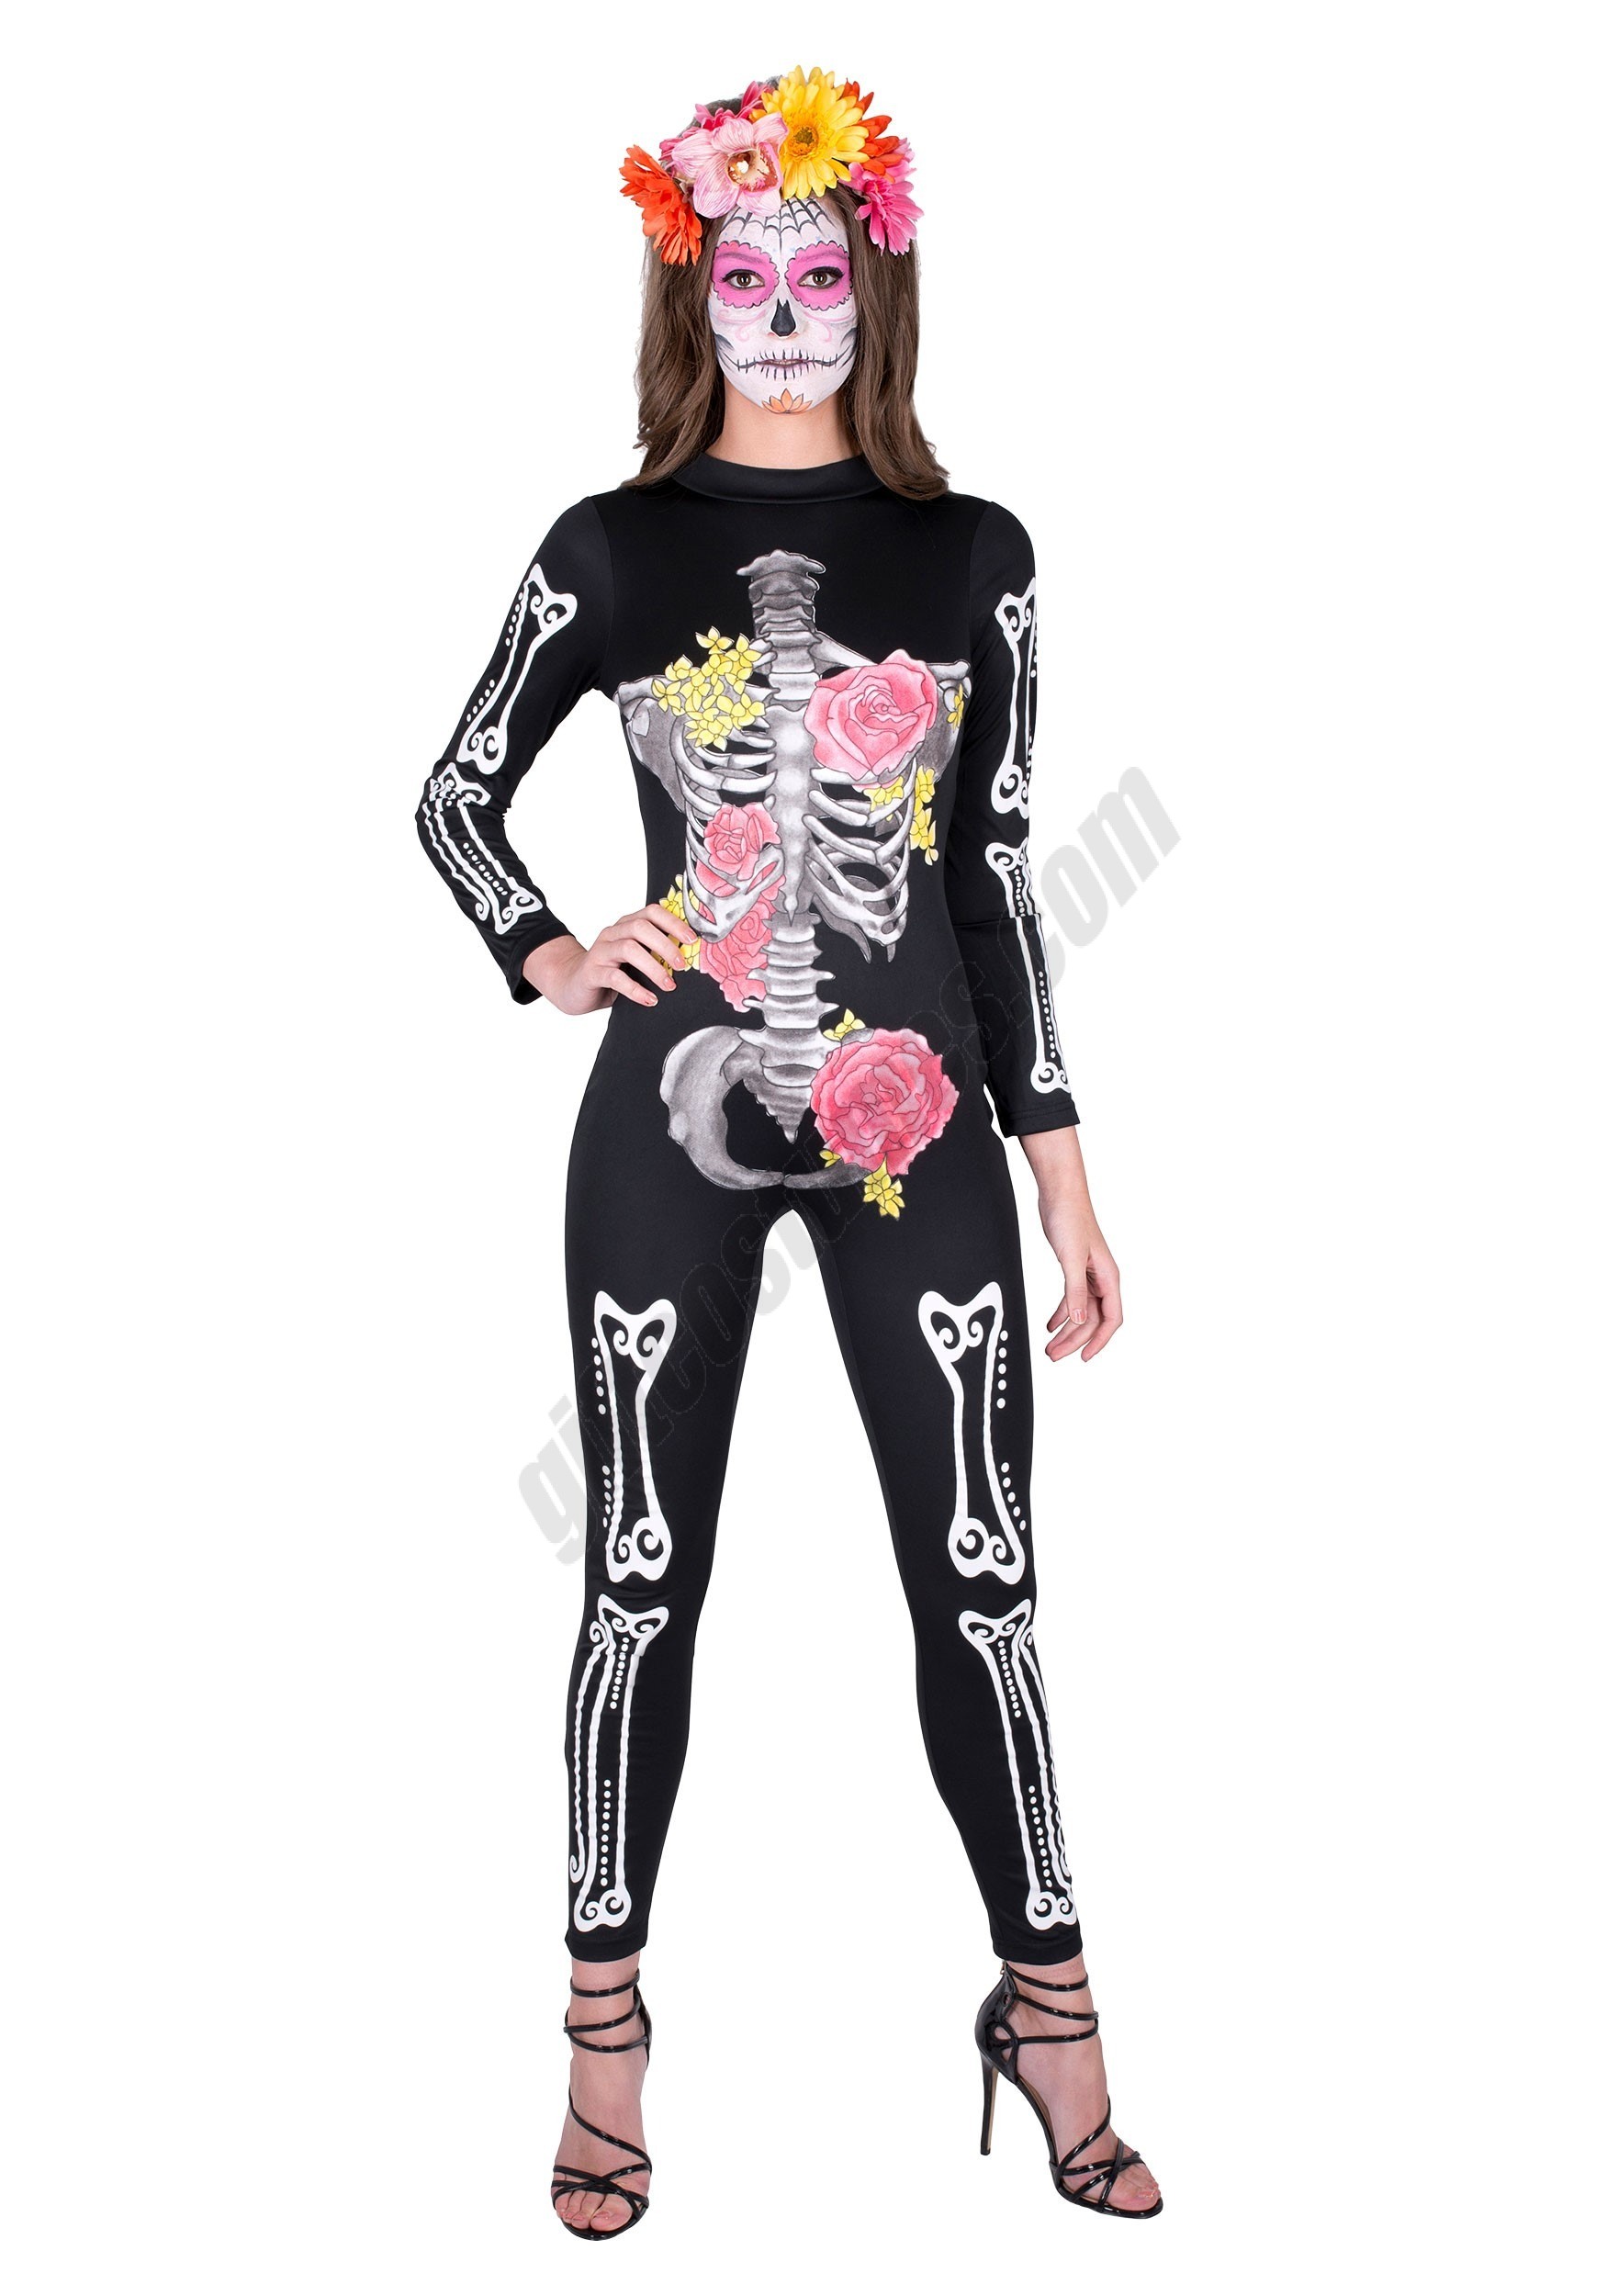 Women's Day of the Dead Catsuit Costume - Women's Day of the Dead Catsuit Costume